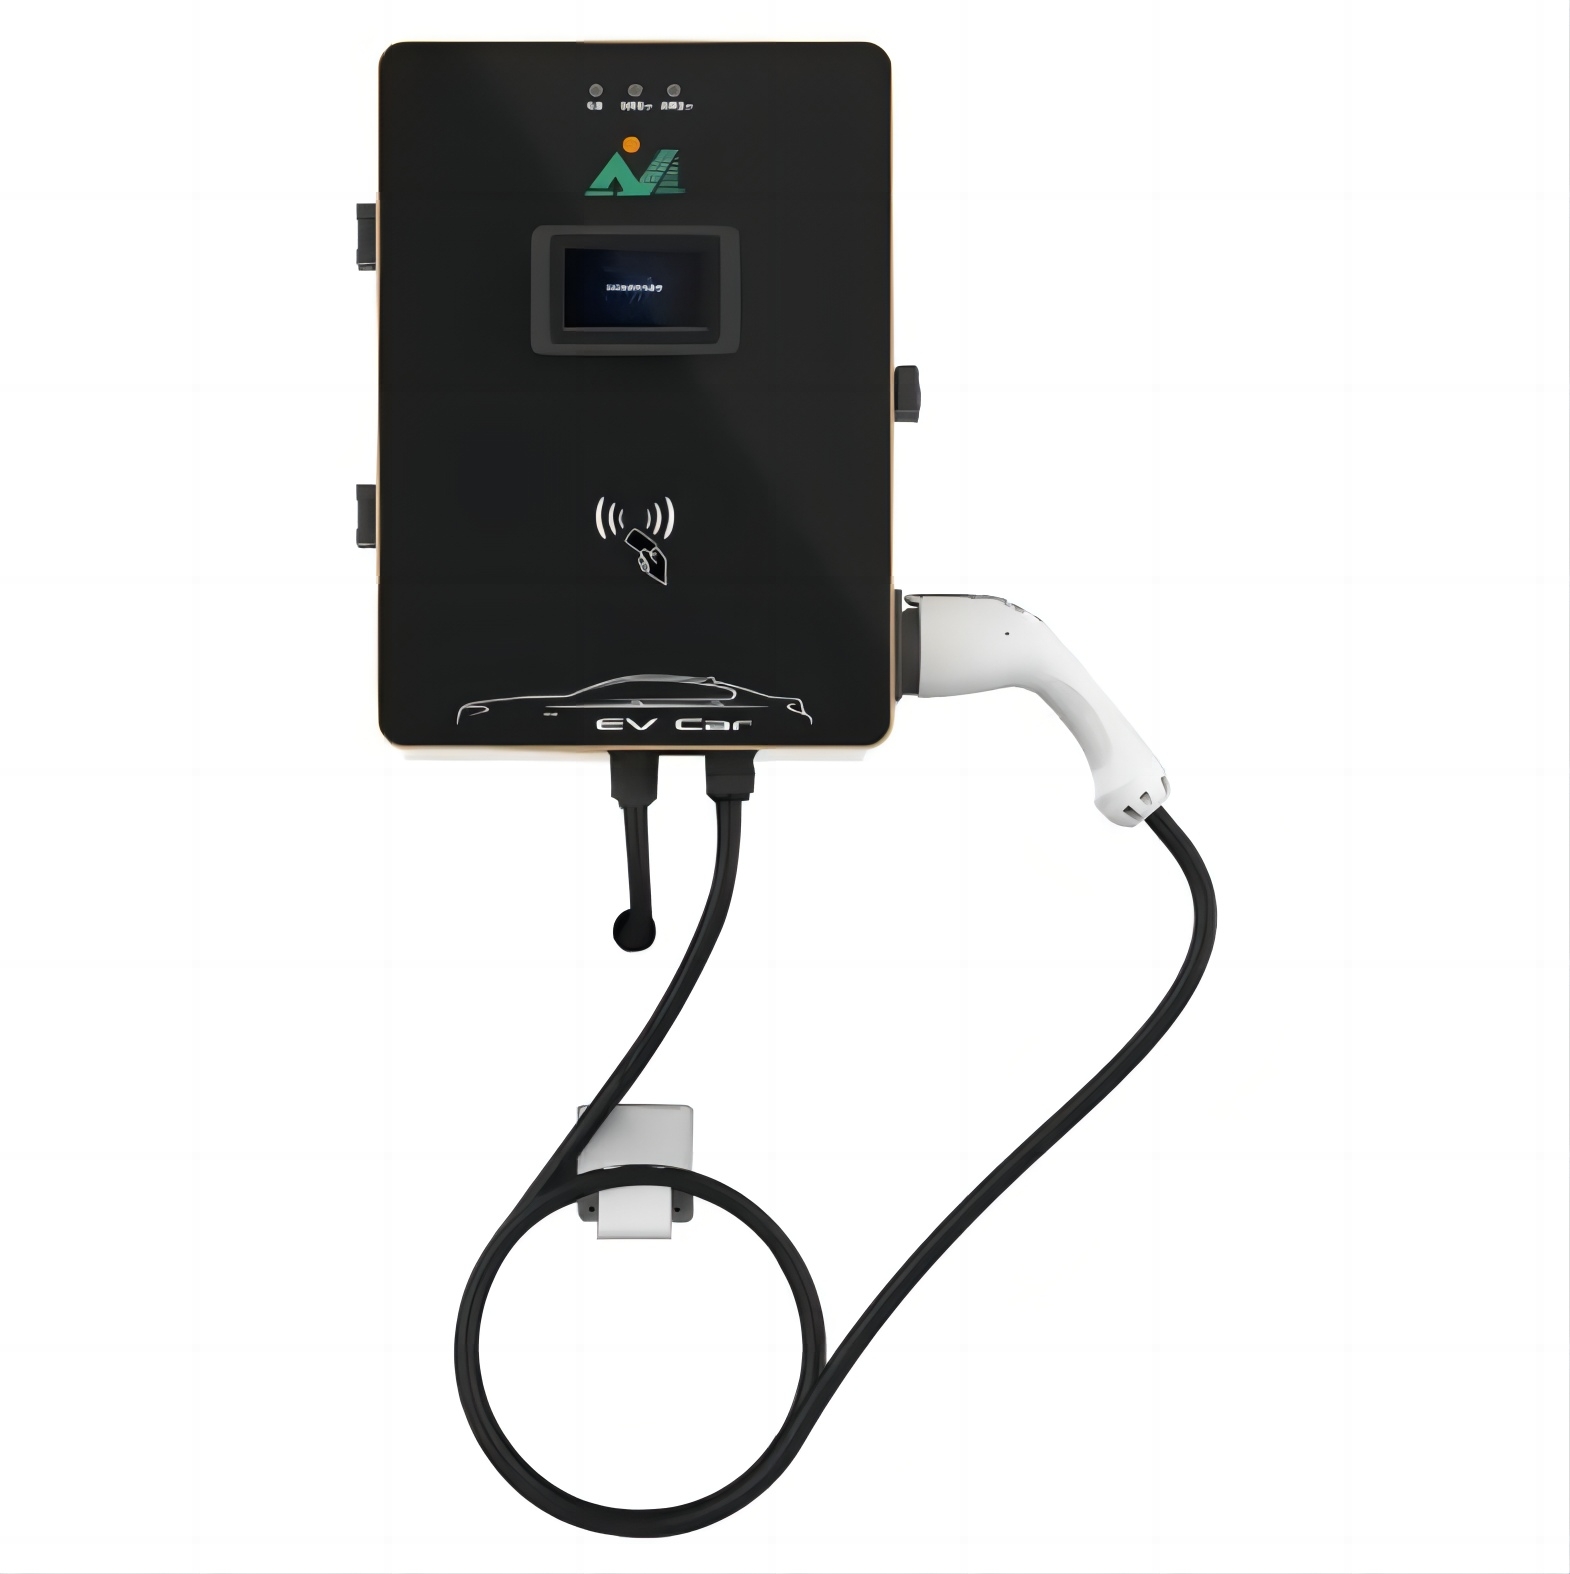 AC-7/14KW 22/44KW 32A 220V Popular Wall Mount Electric Vehicle AC Charging Station